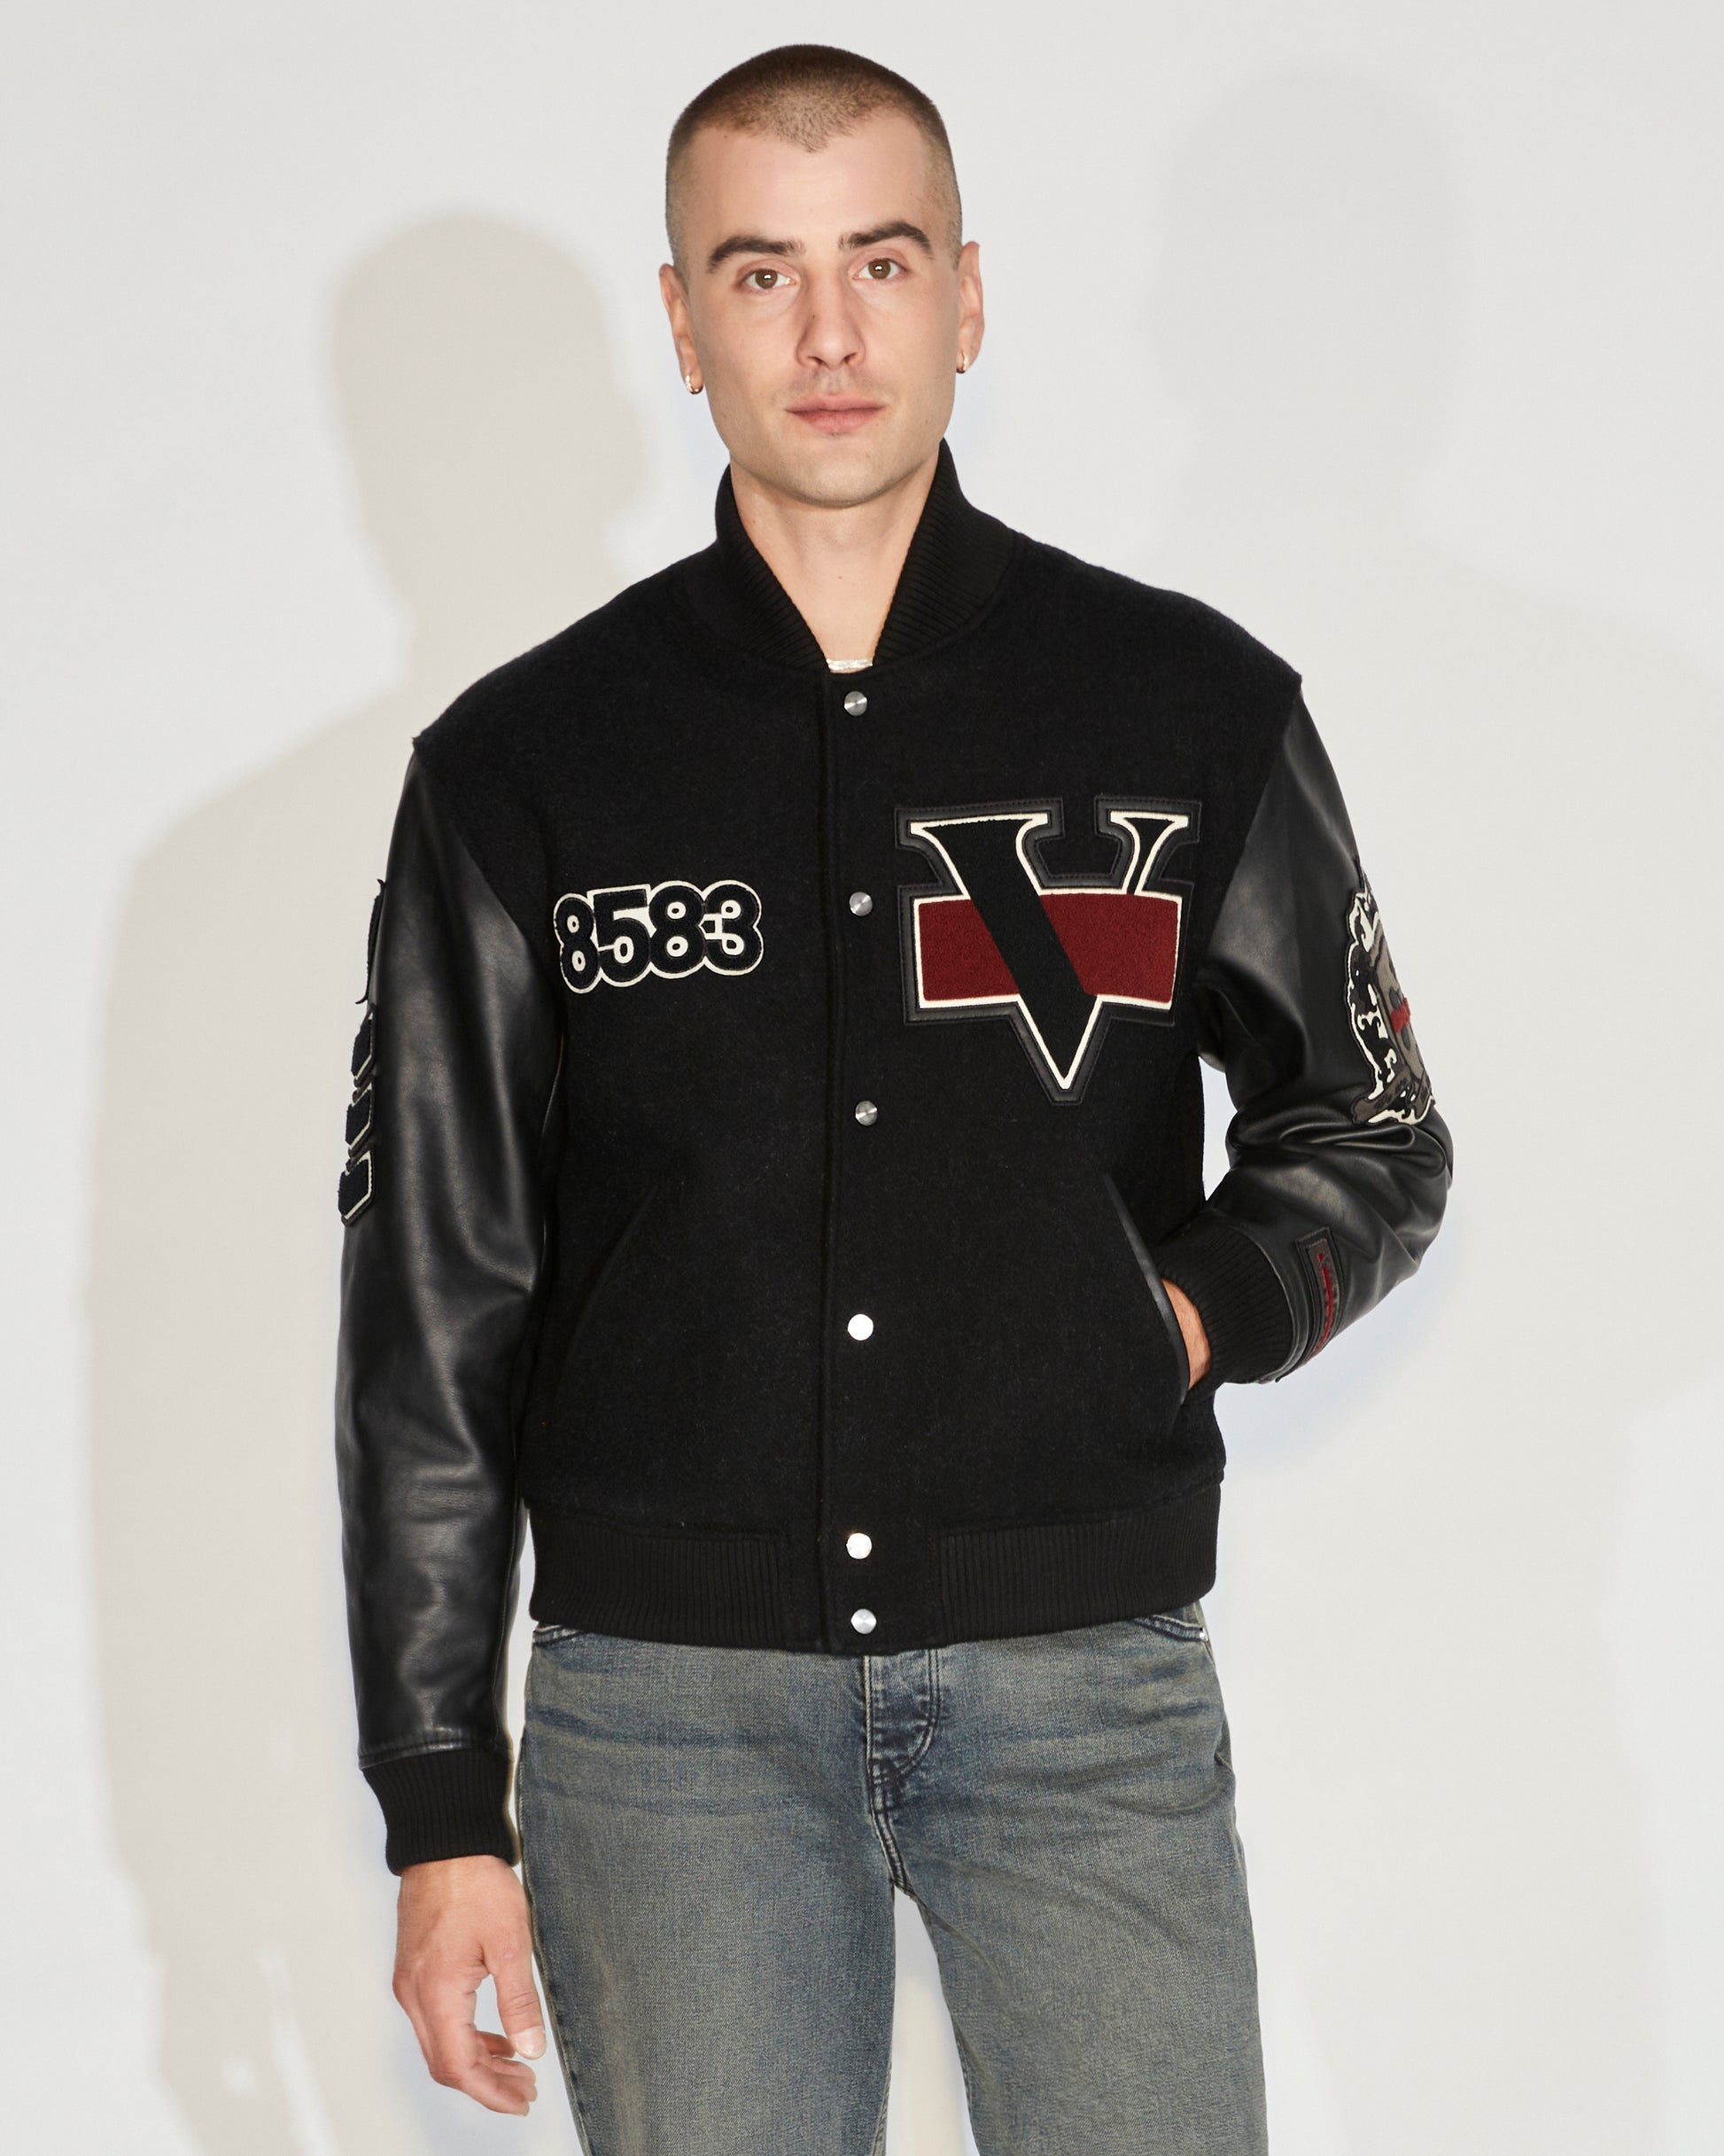 Man standing wearing a black button-up varsity jacket with chest with arm patches and jeans